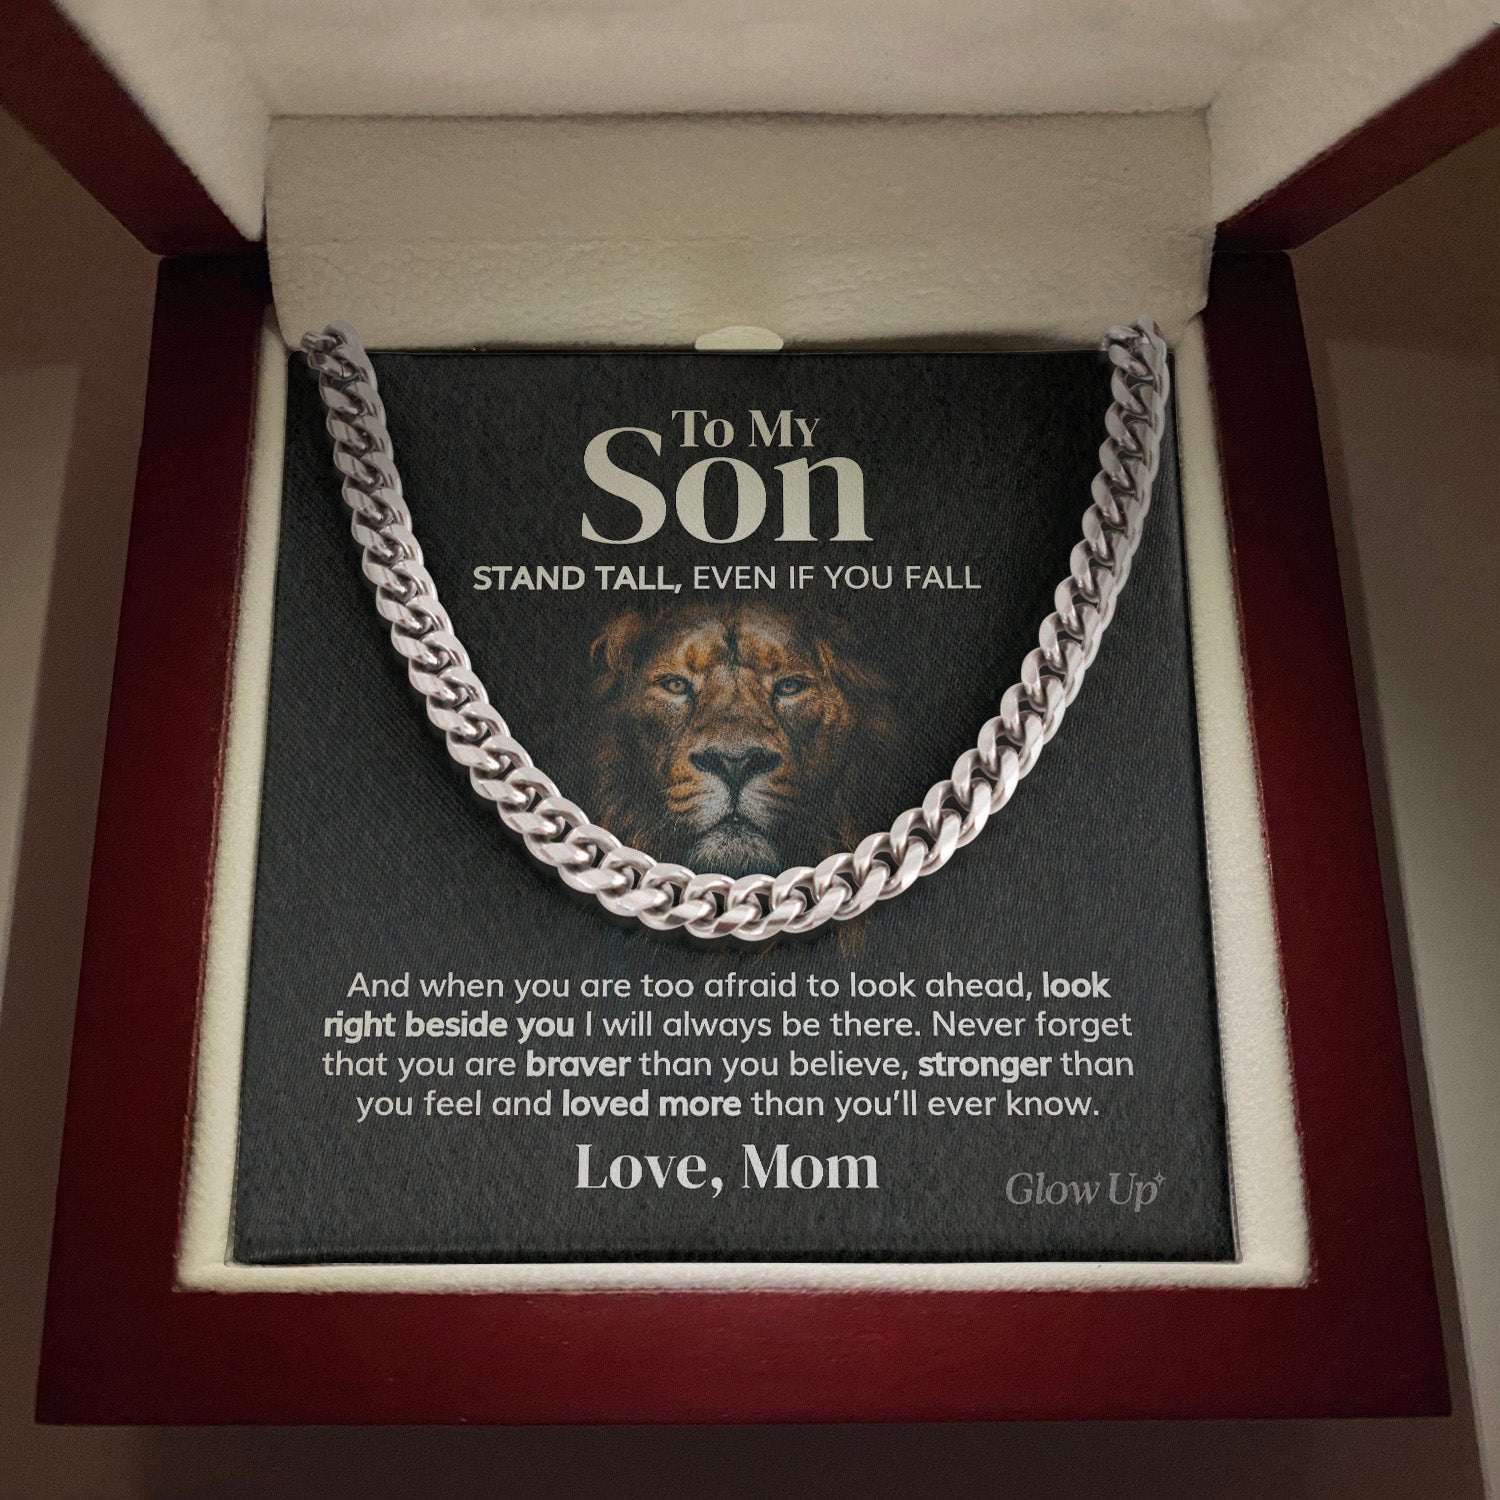 Glow Up Cuban Link Chain 316L Stainless Steel / Luxury LED Box To my Son from Mom - 5mm Cuban Link Chain - Stand Tall